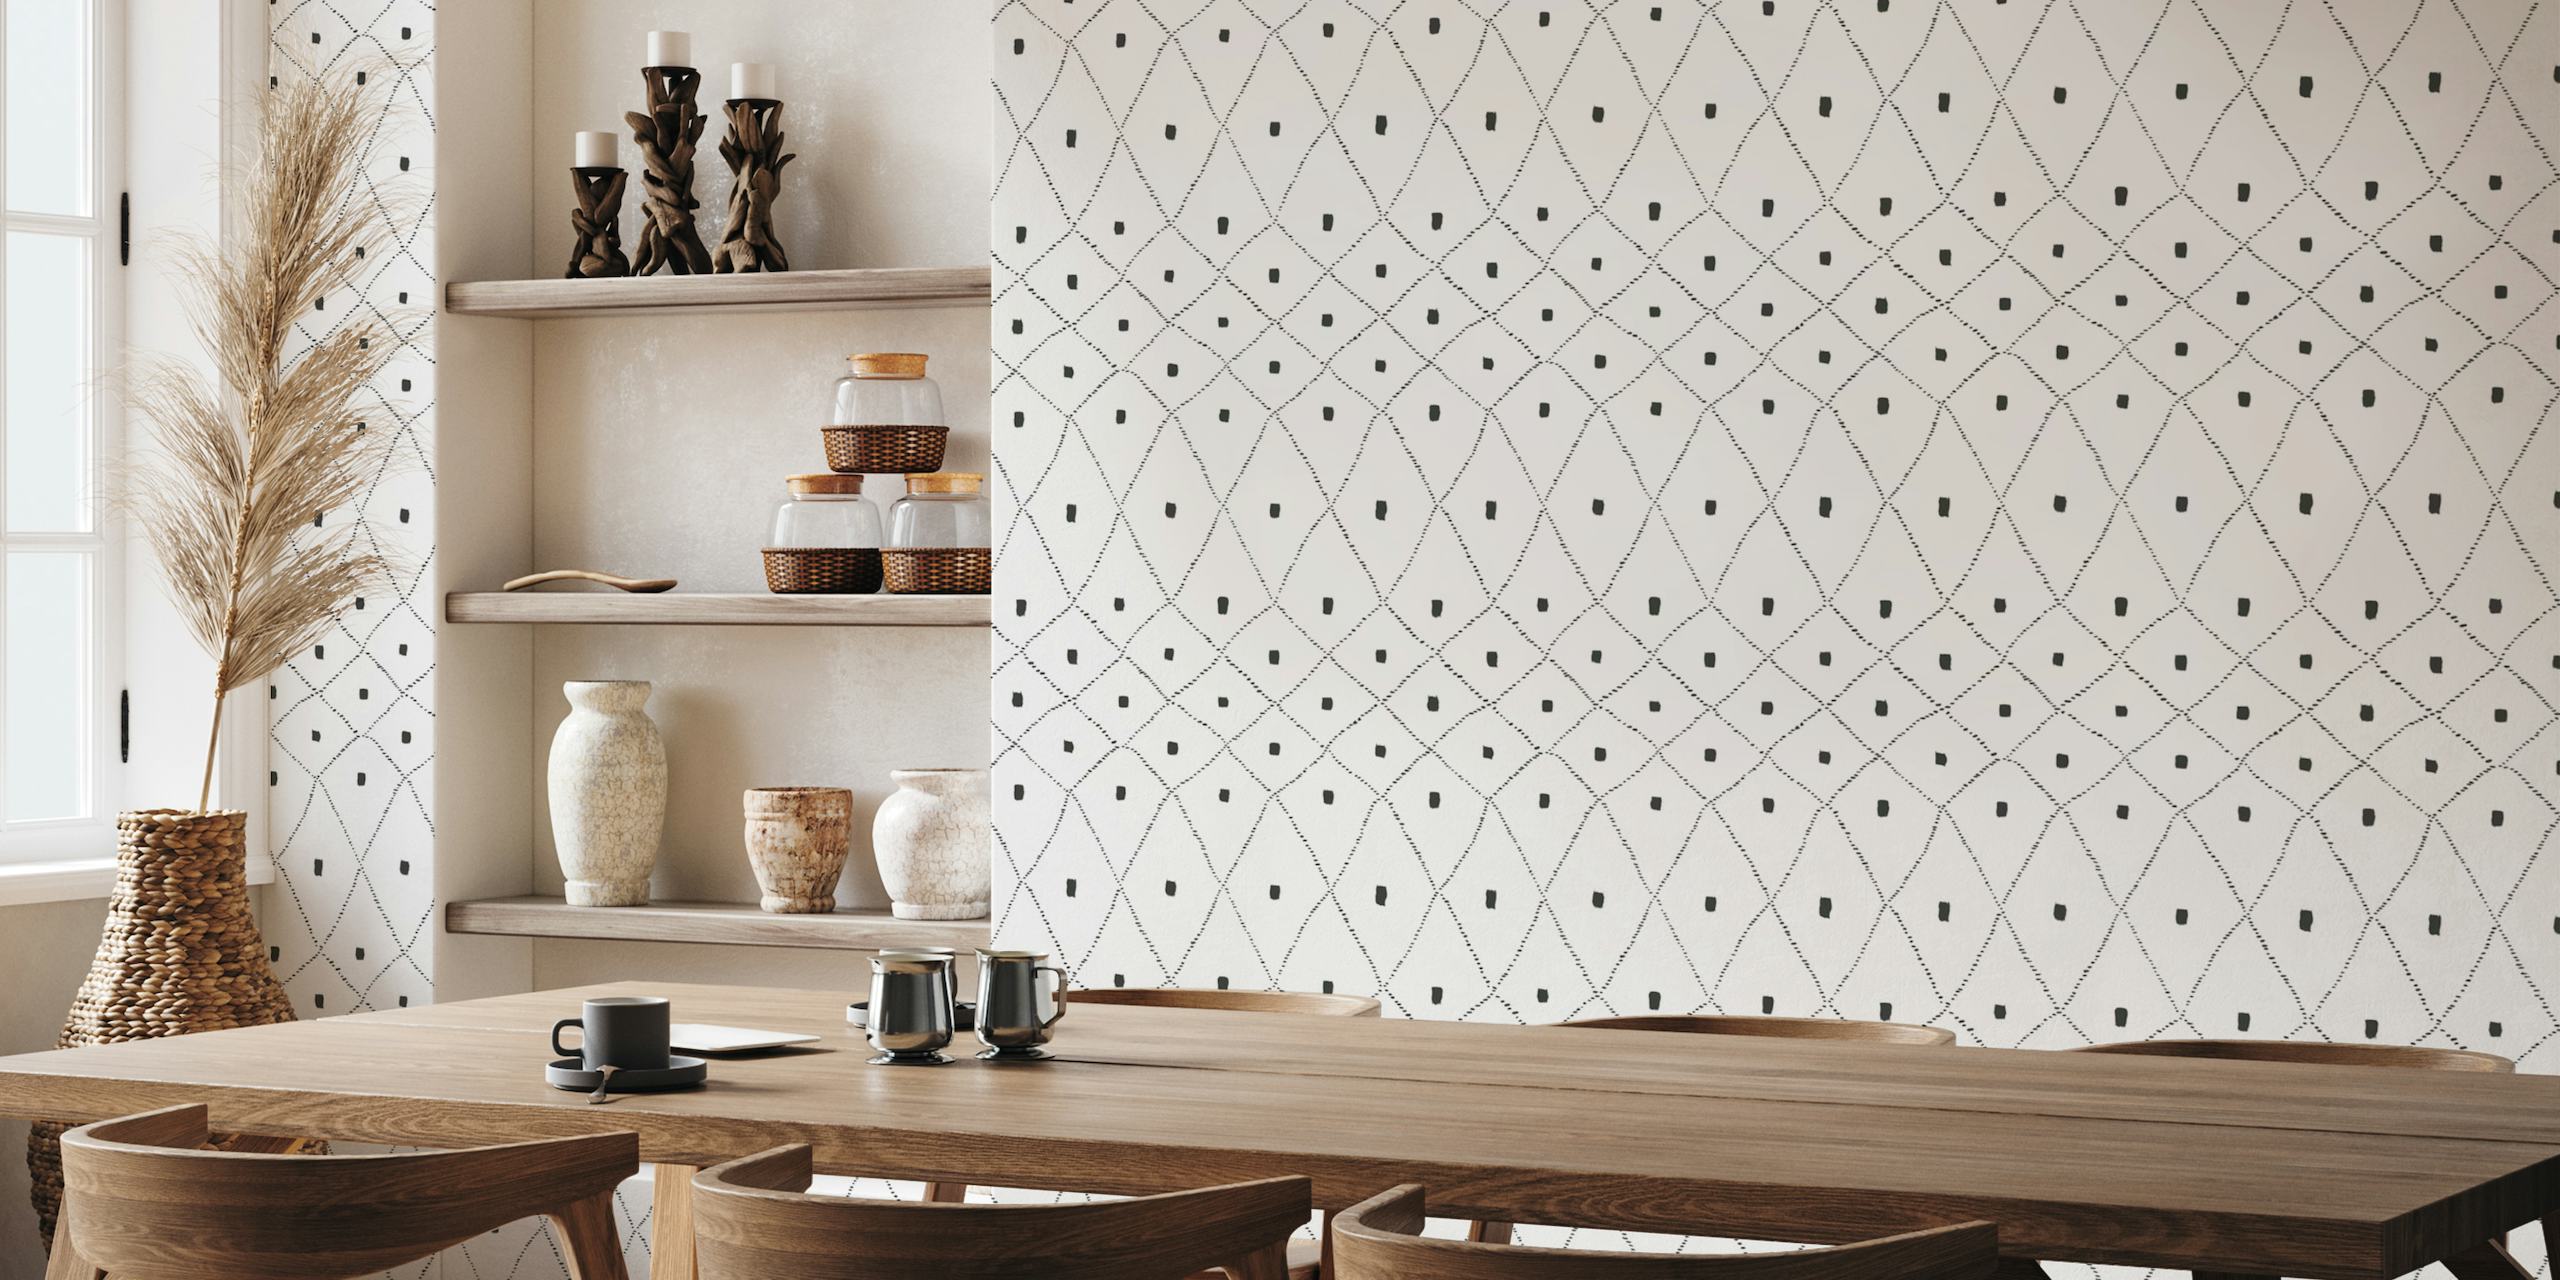 Abstract geometric diamond pattern wall mural in black and white from happywall.com